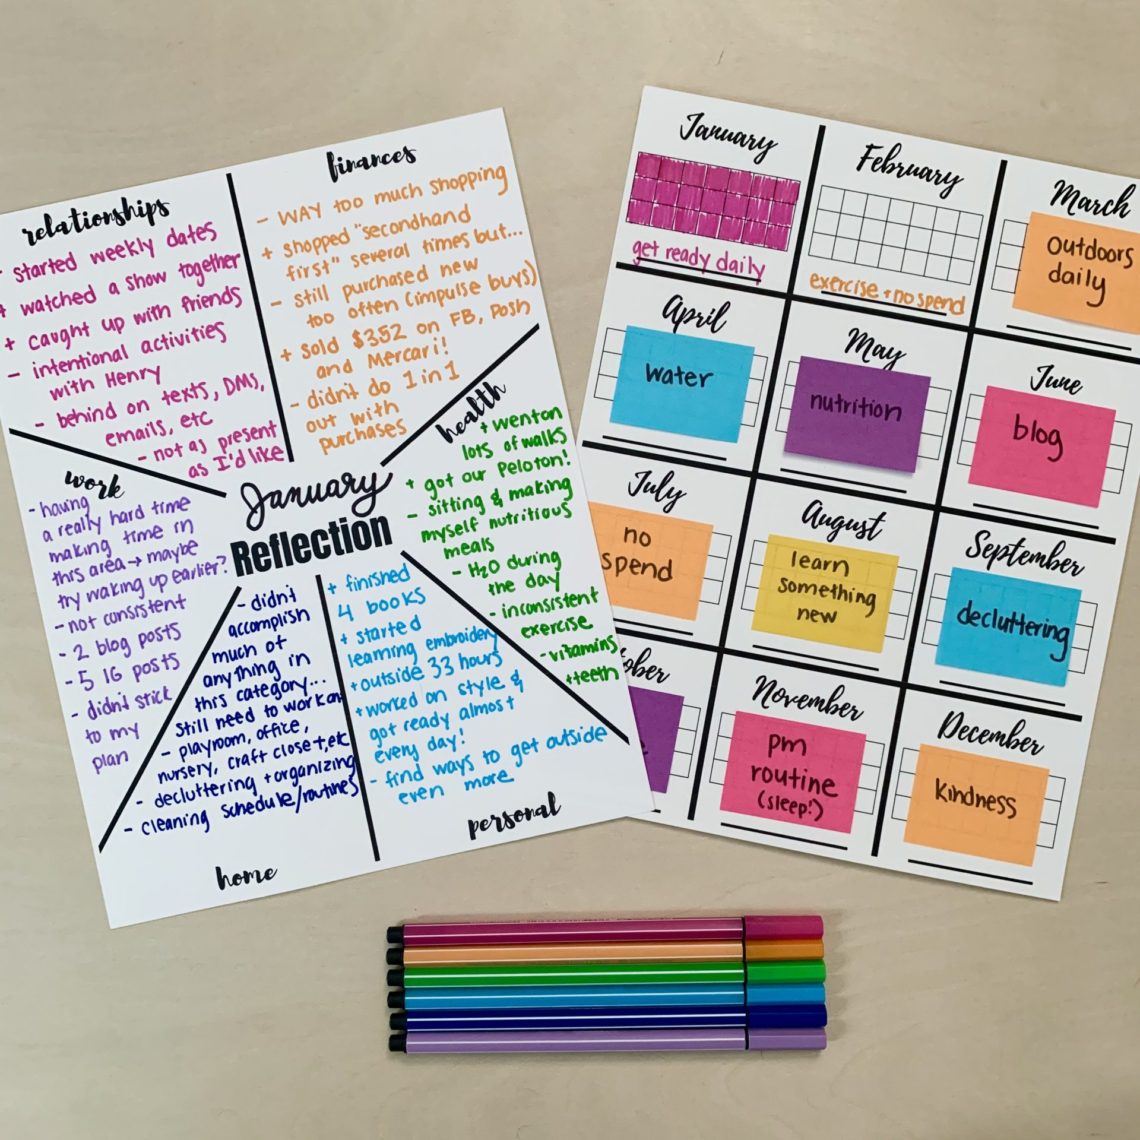 Monthly reflection and goal setting printables. #freeprintable #freetemplate #worksheet #monthlygoals #monthlyreflection #habittracker #stickynotes